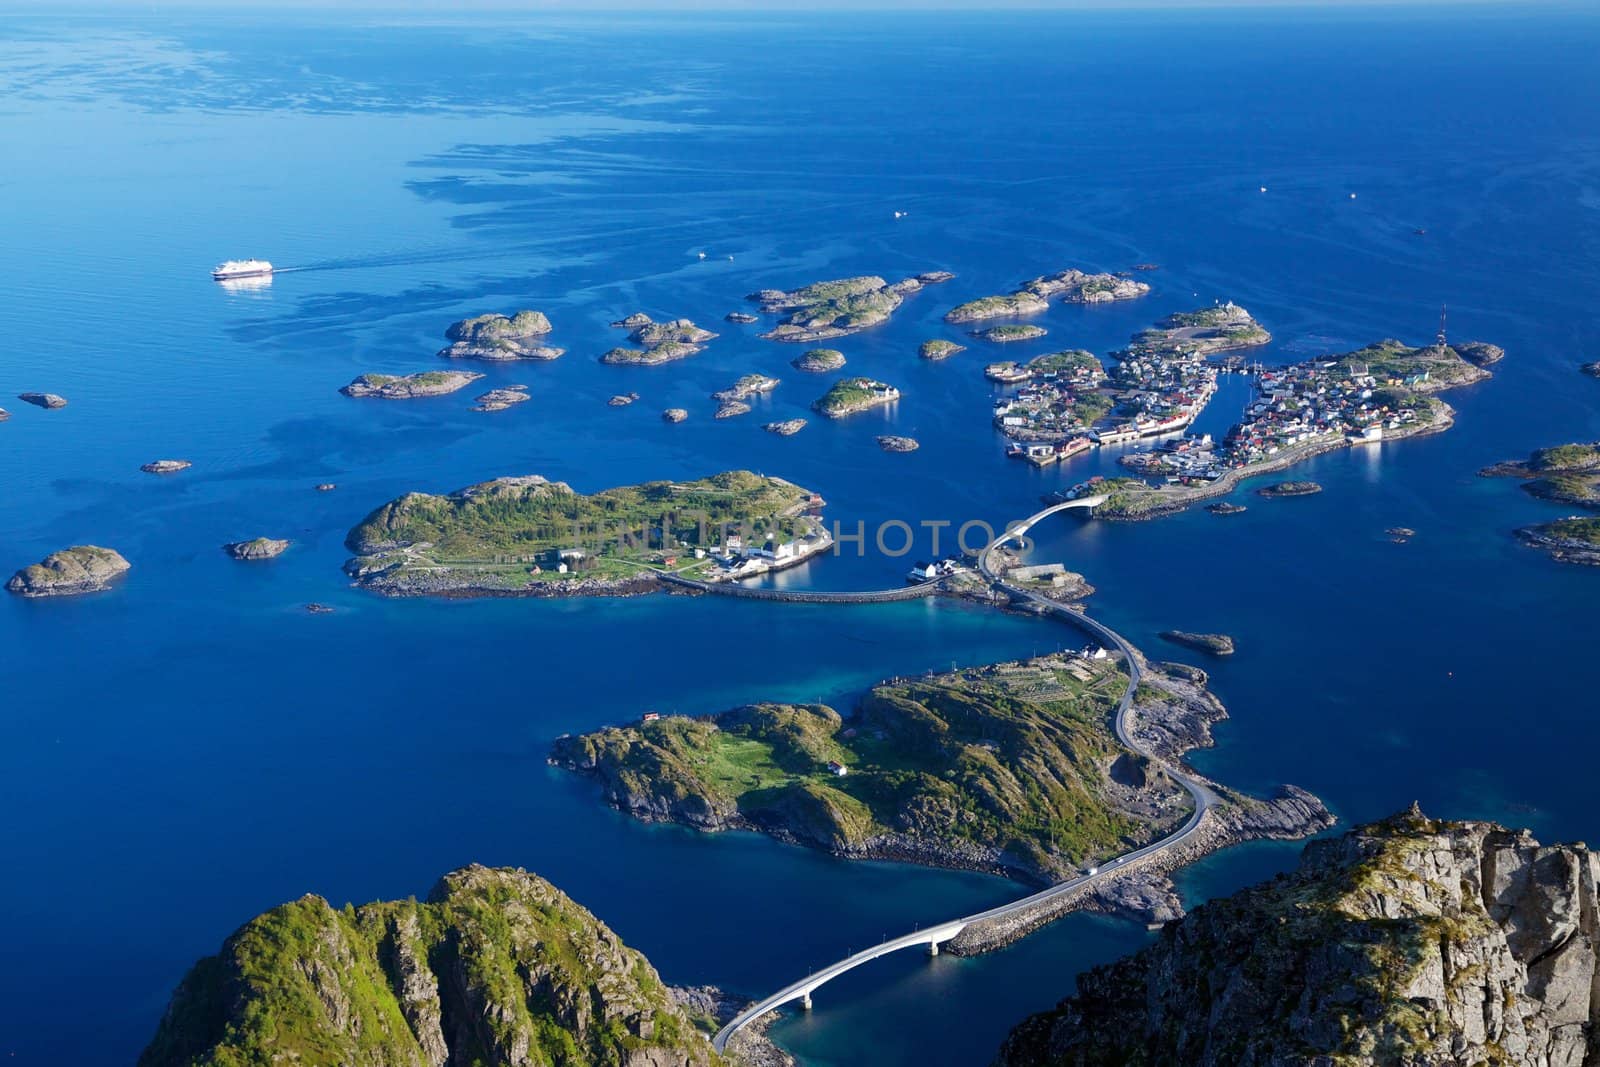 Scenic town of Henningsvaer on Lofoten islands in Norway with large fishing harbour and bridges connecting rocky islands